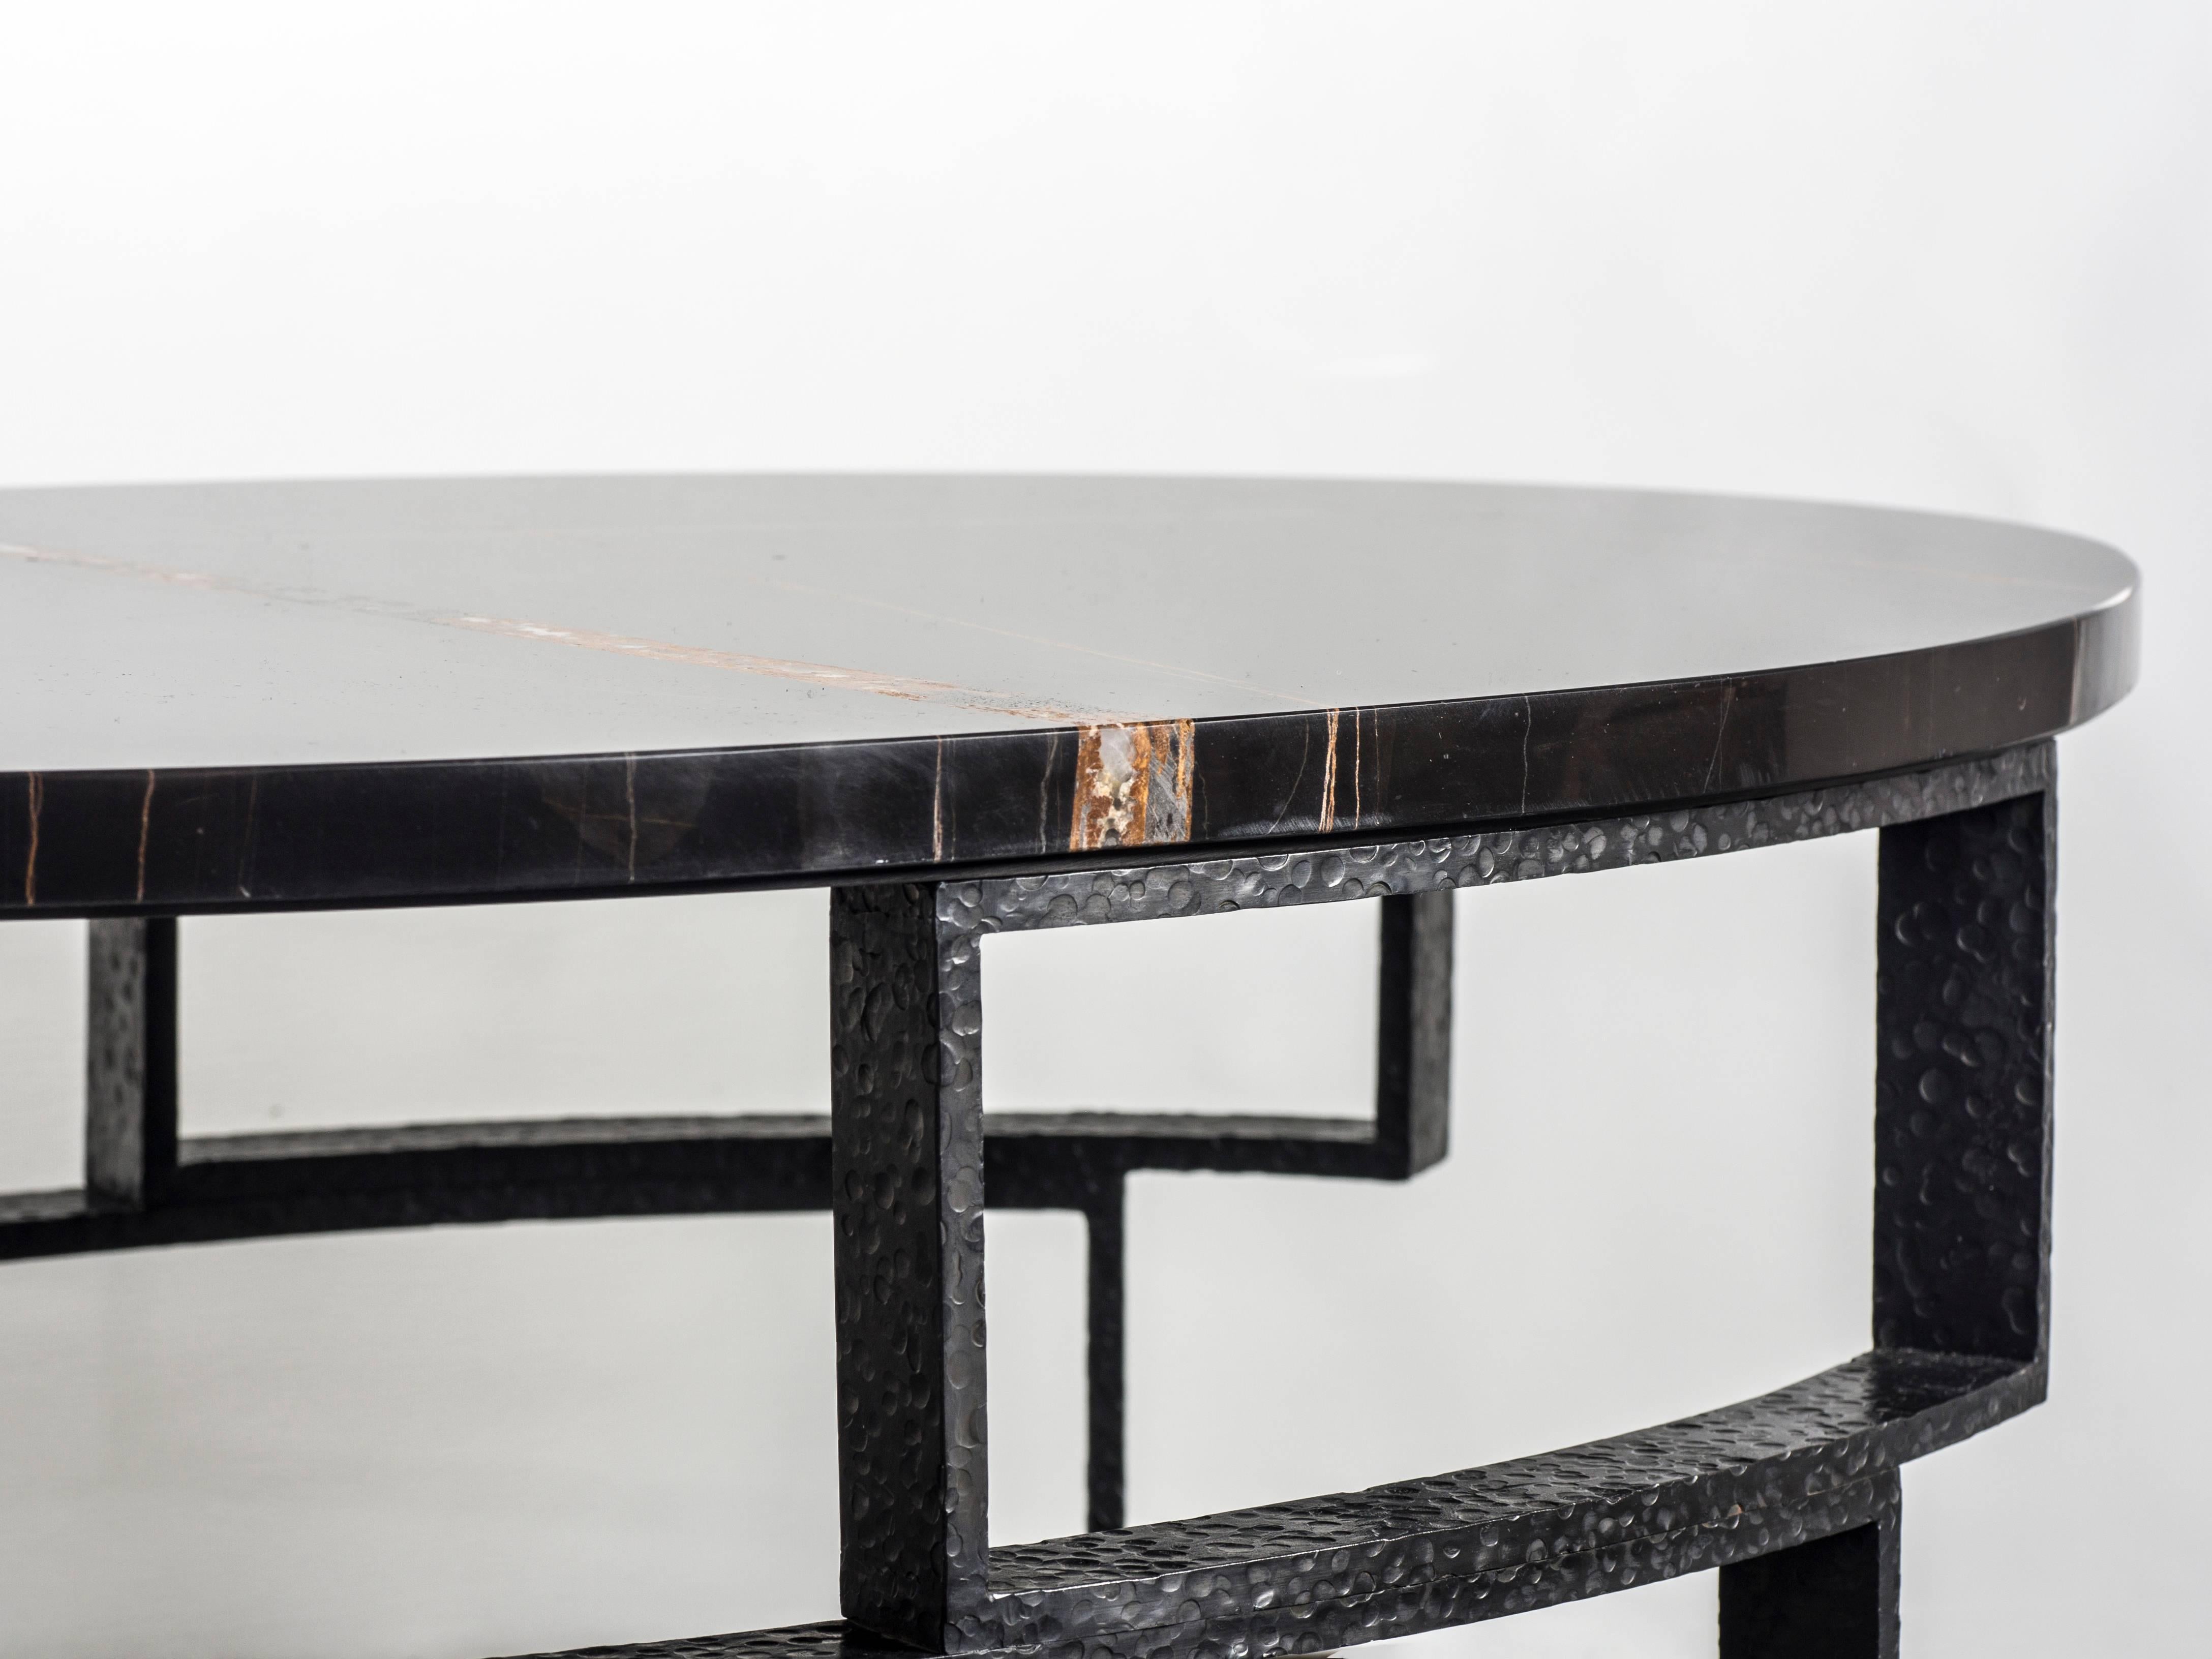 Hammered Windows Ellipse Table with Noir Doré Top and Burnished Hammered Steel In New Condition For Sale In Firenze, IT